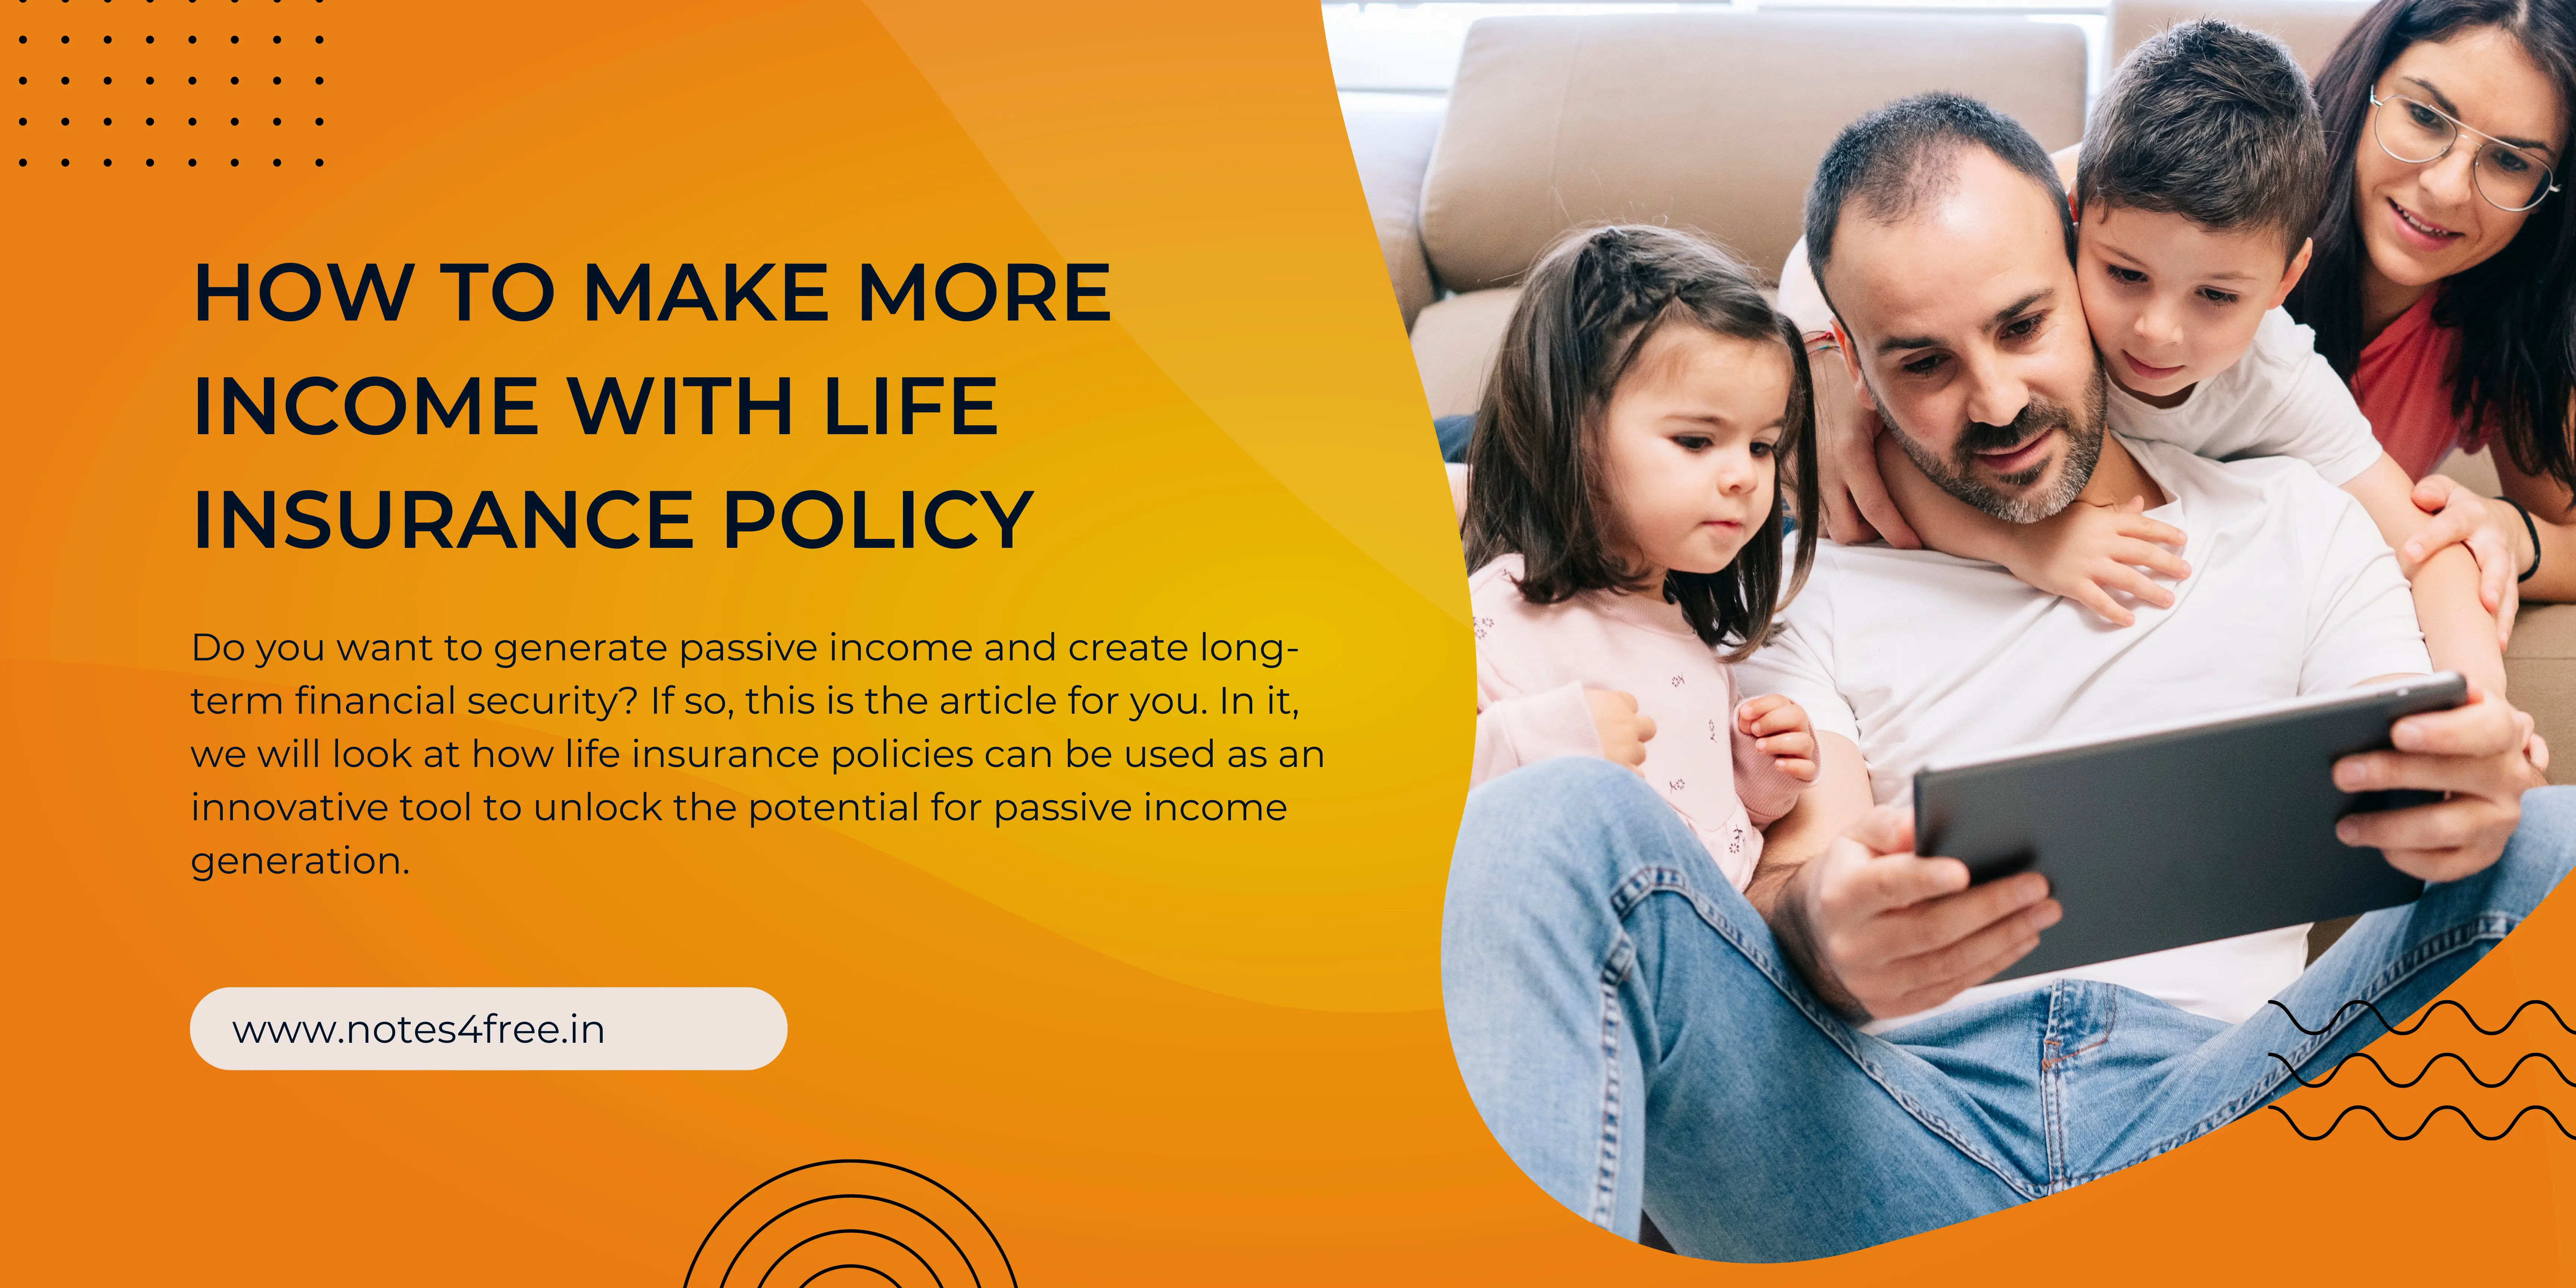 How to make more income with life insurance policy